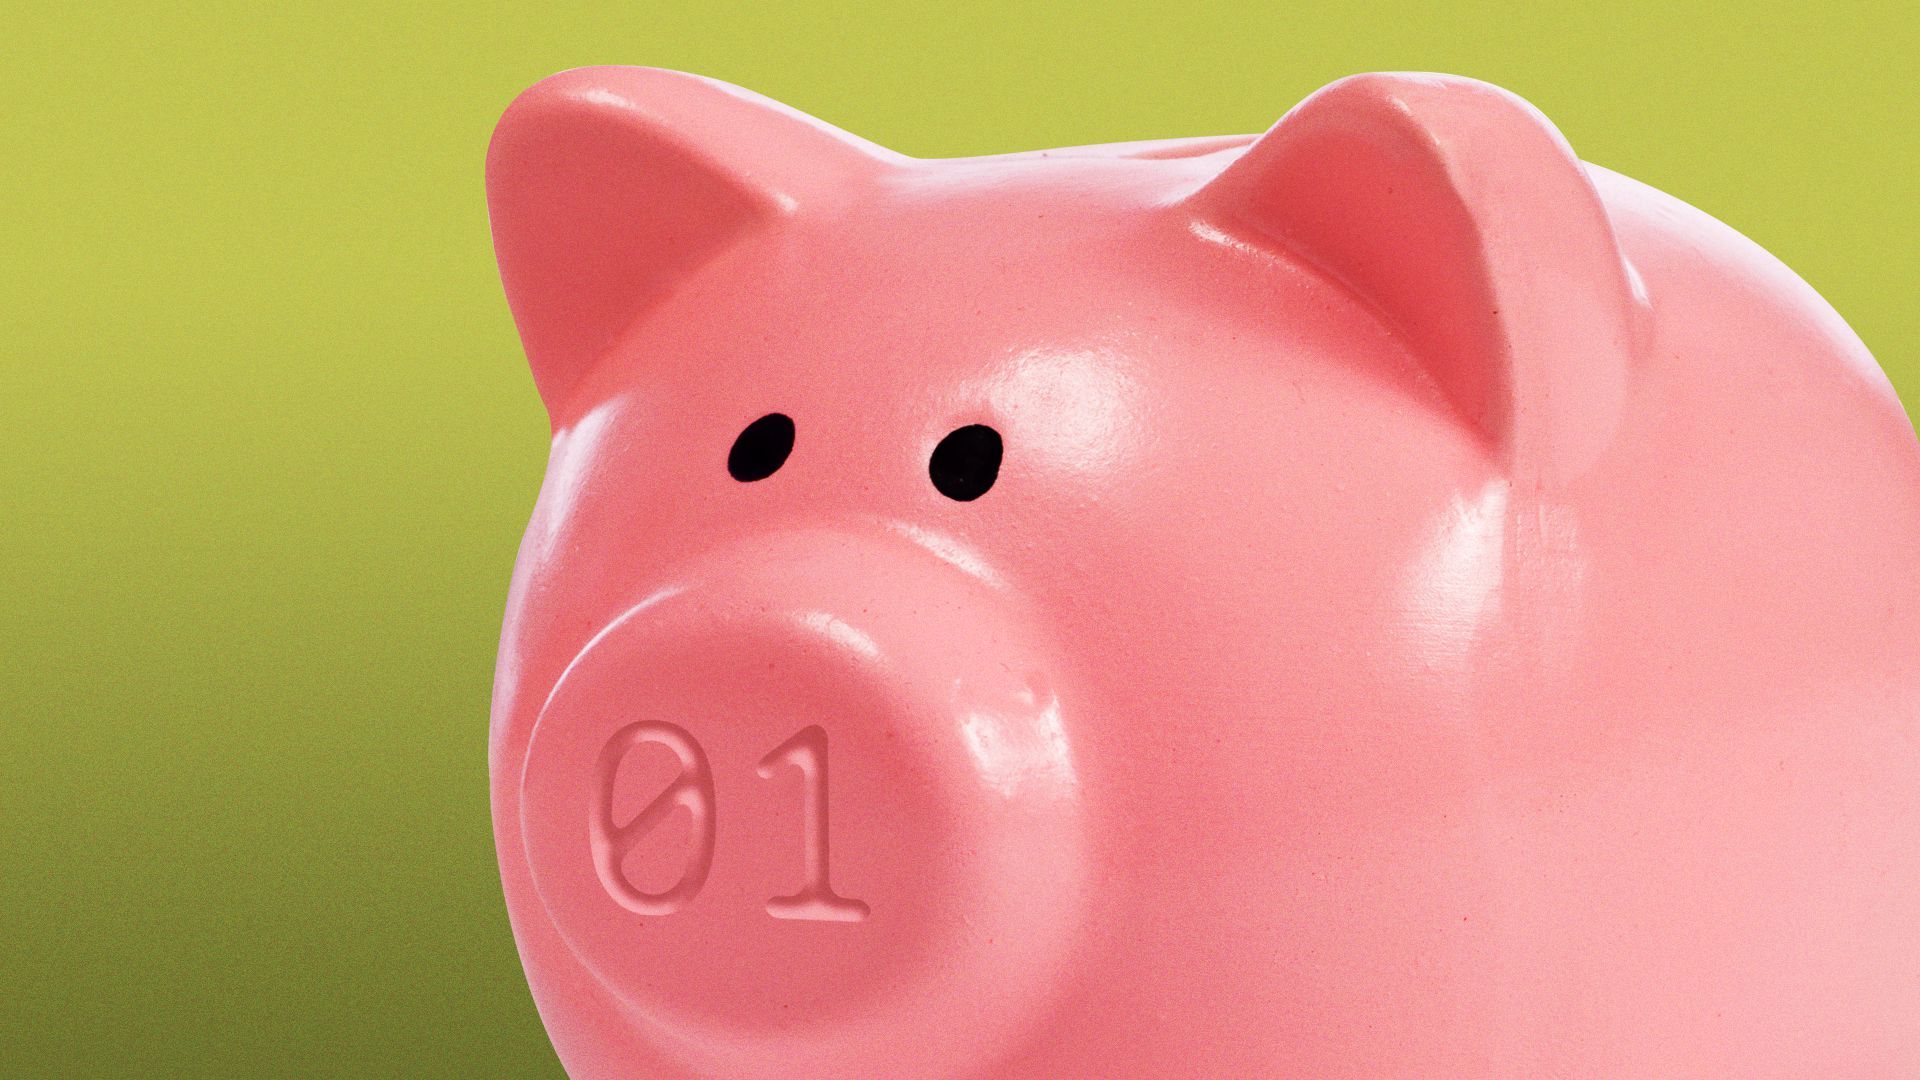 Illustration of a piggy bank, but the dots on its nose have been replaced with binary code 01.